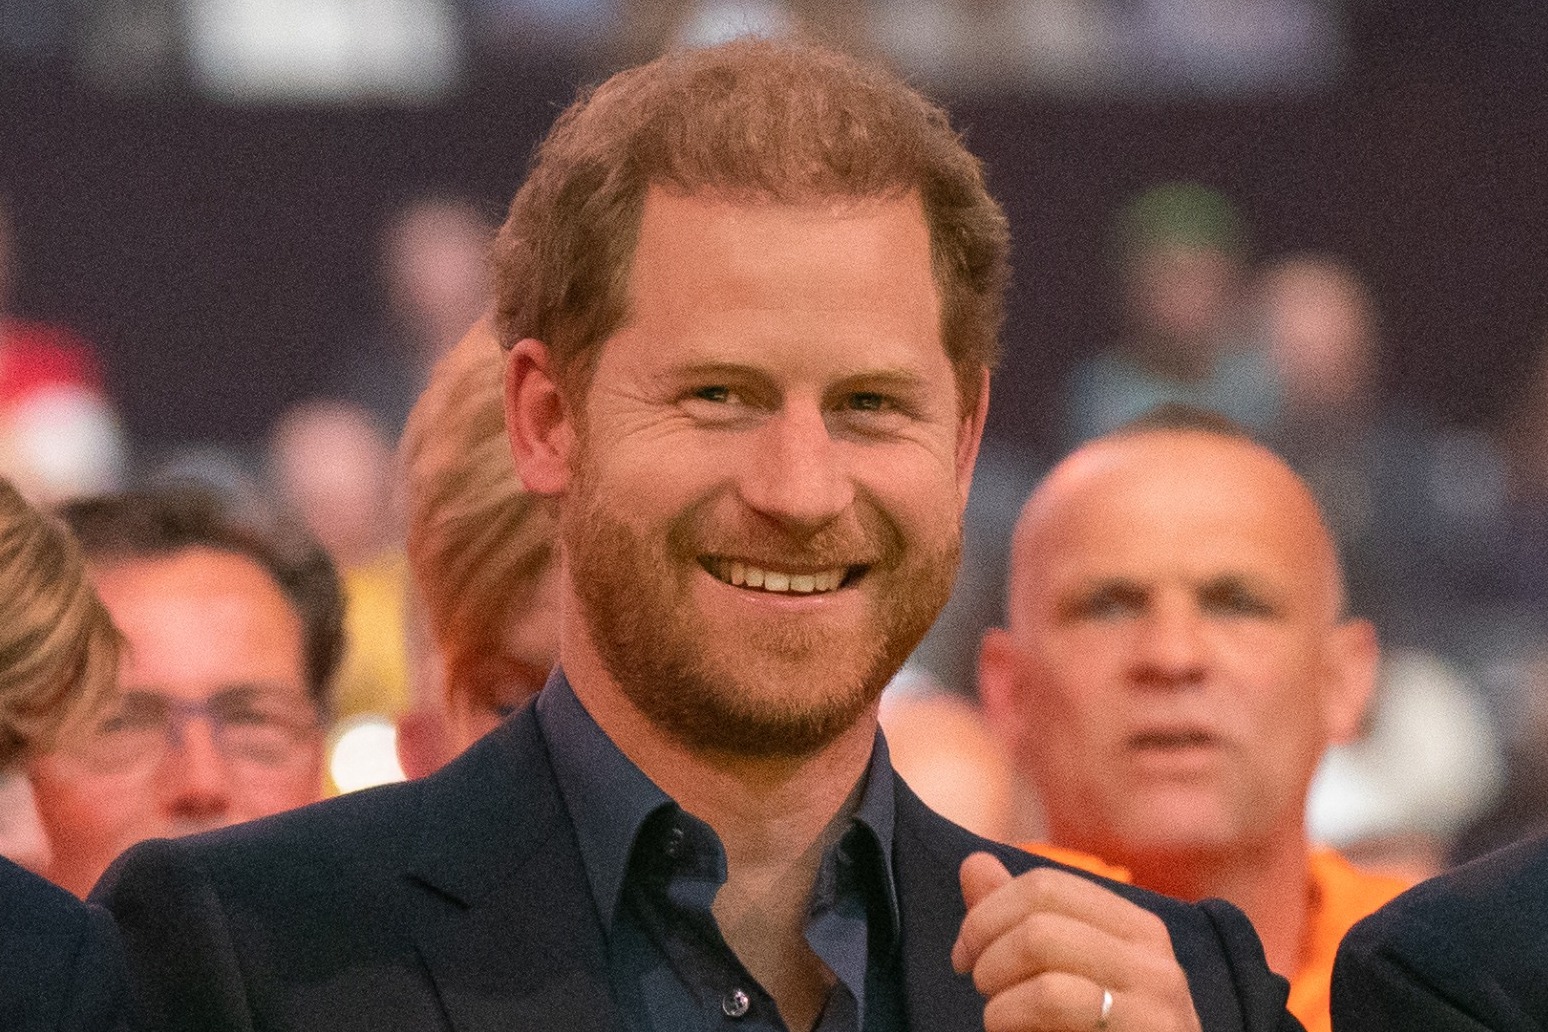 Duke of Sussex wins bid for review of Home Office security decision 